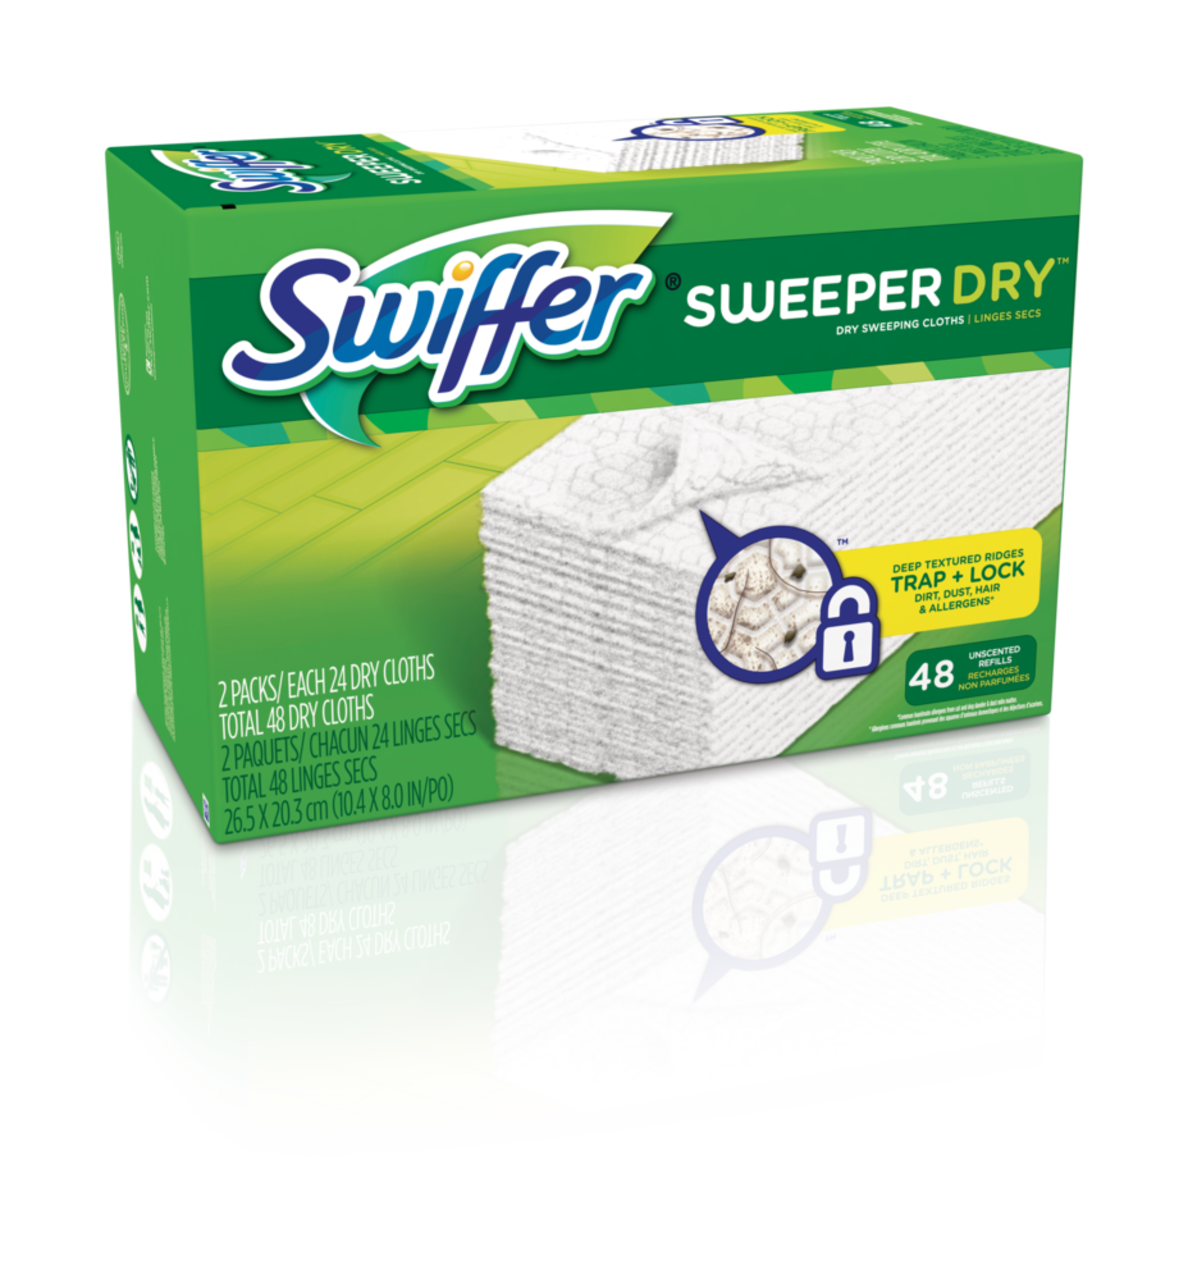 Swiffer Dry Sweeping Cloths, Unscented, 48-pk